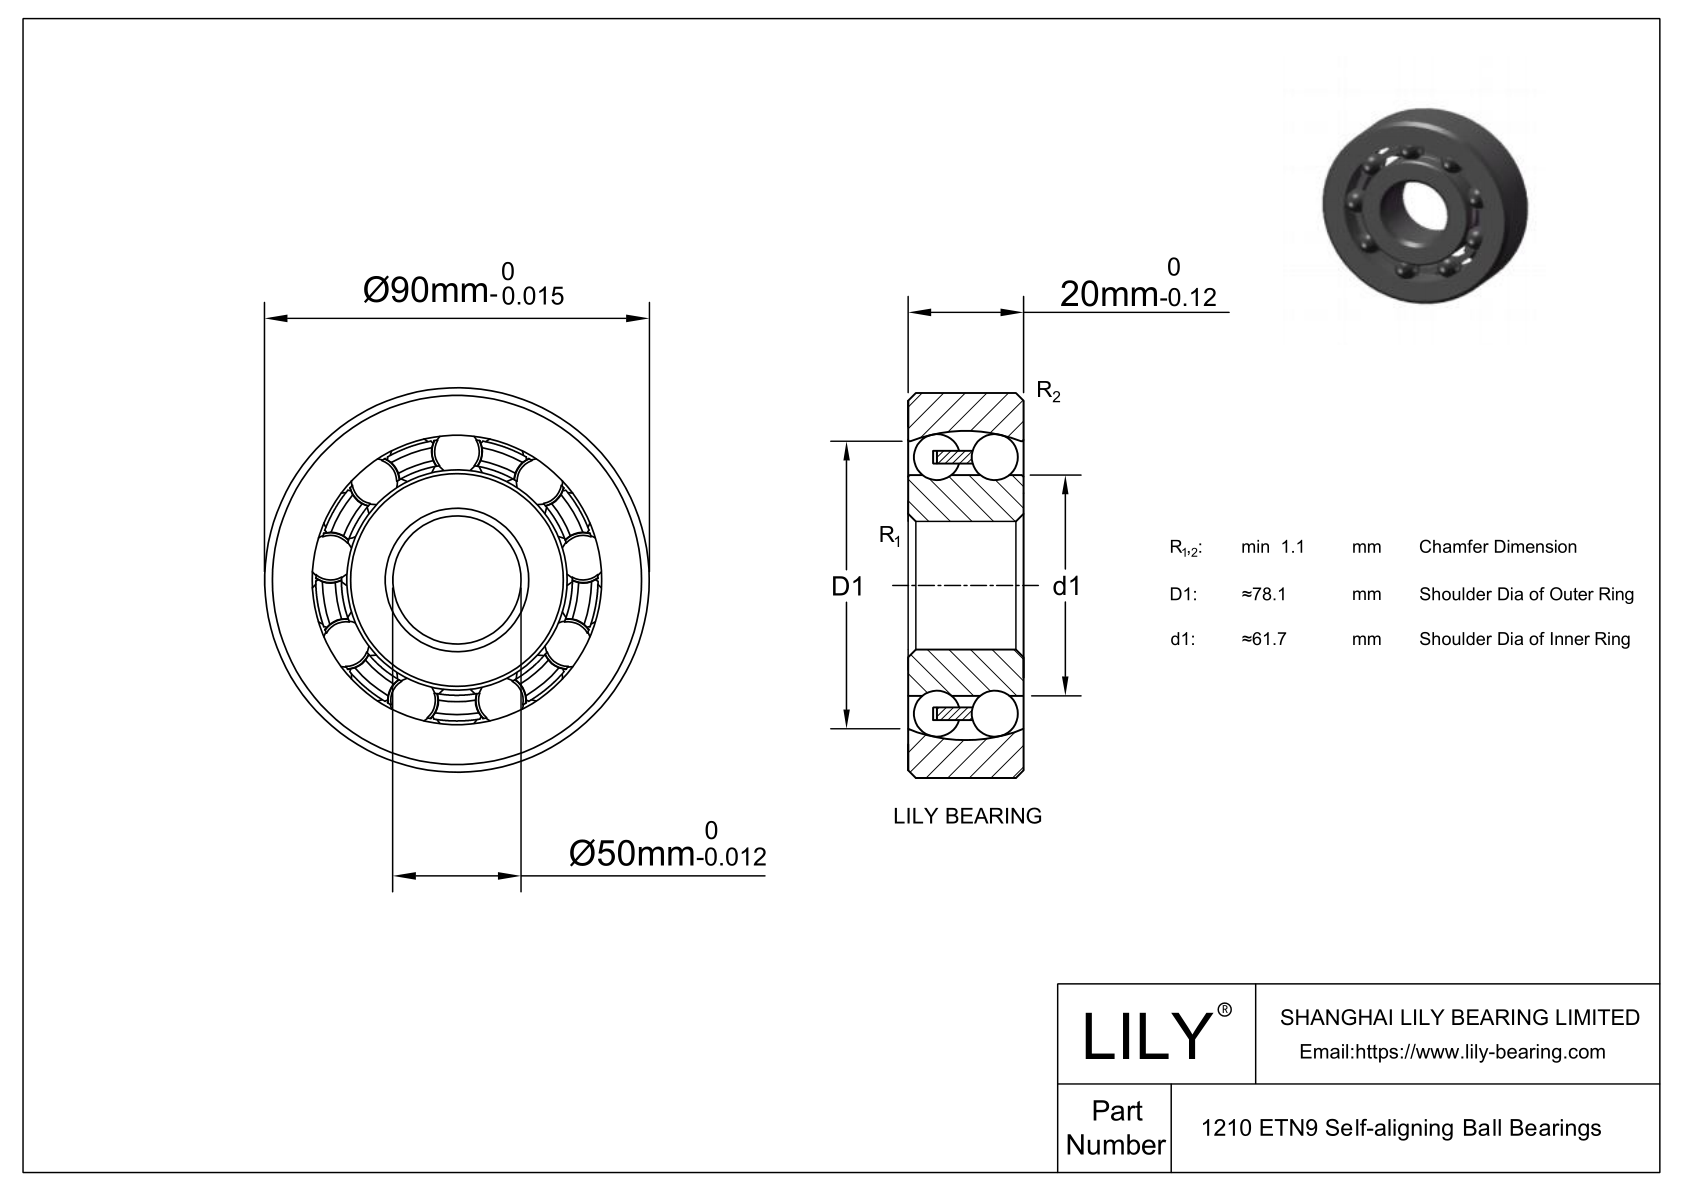 S1210 ETN9 Stainless Steel Self Aligning Ball Bearings cad drawing